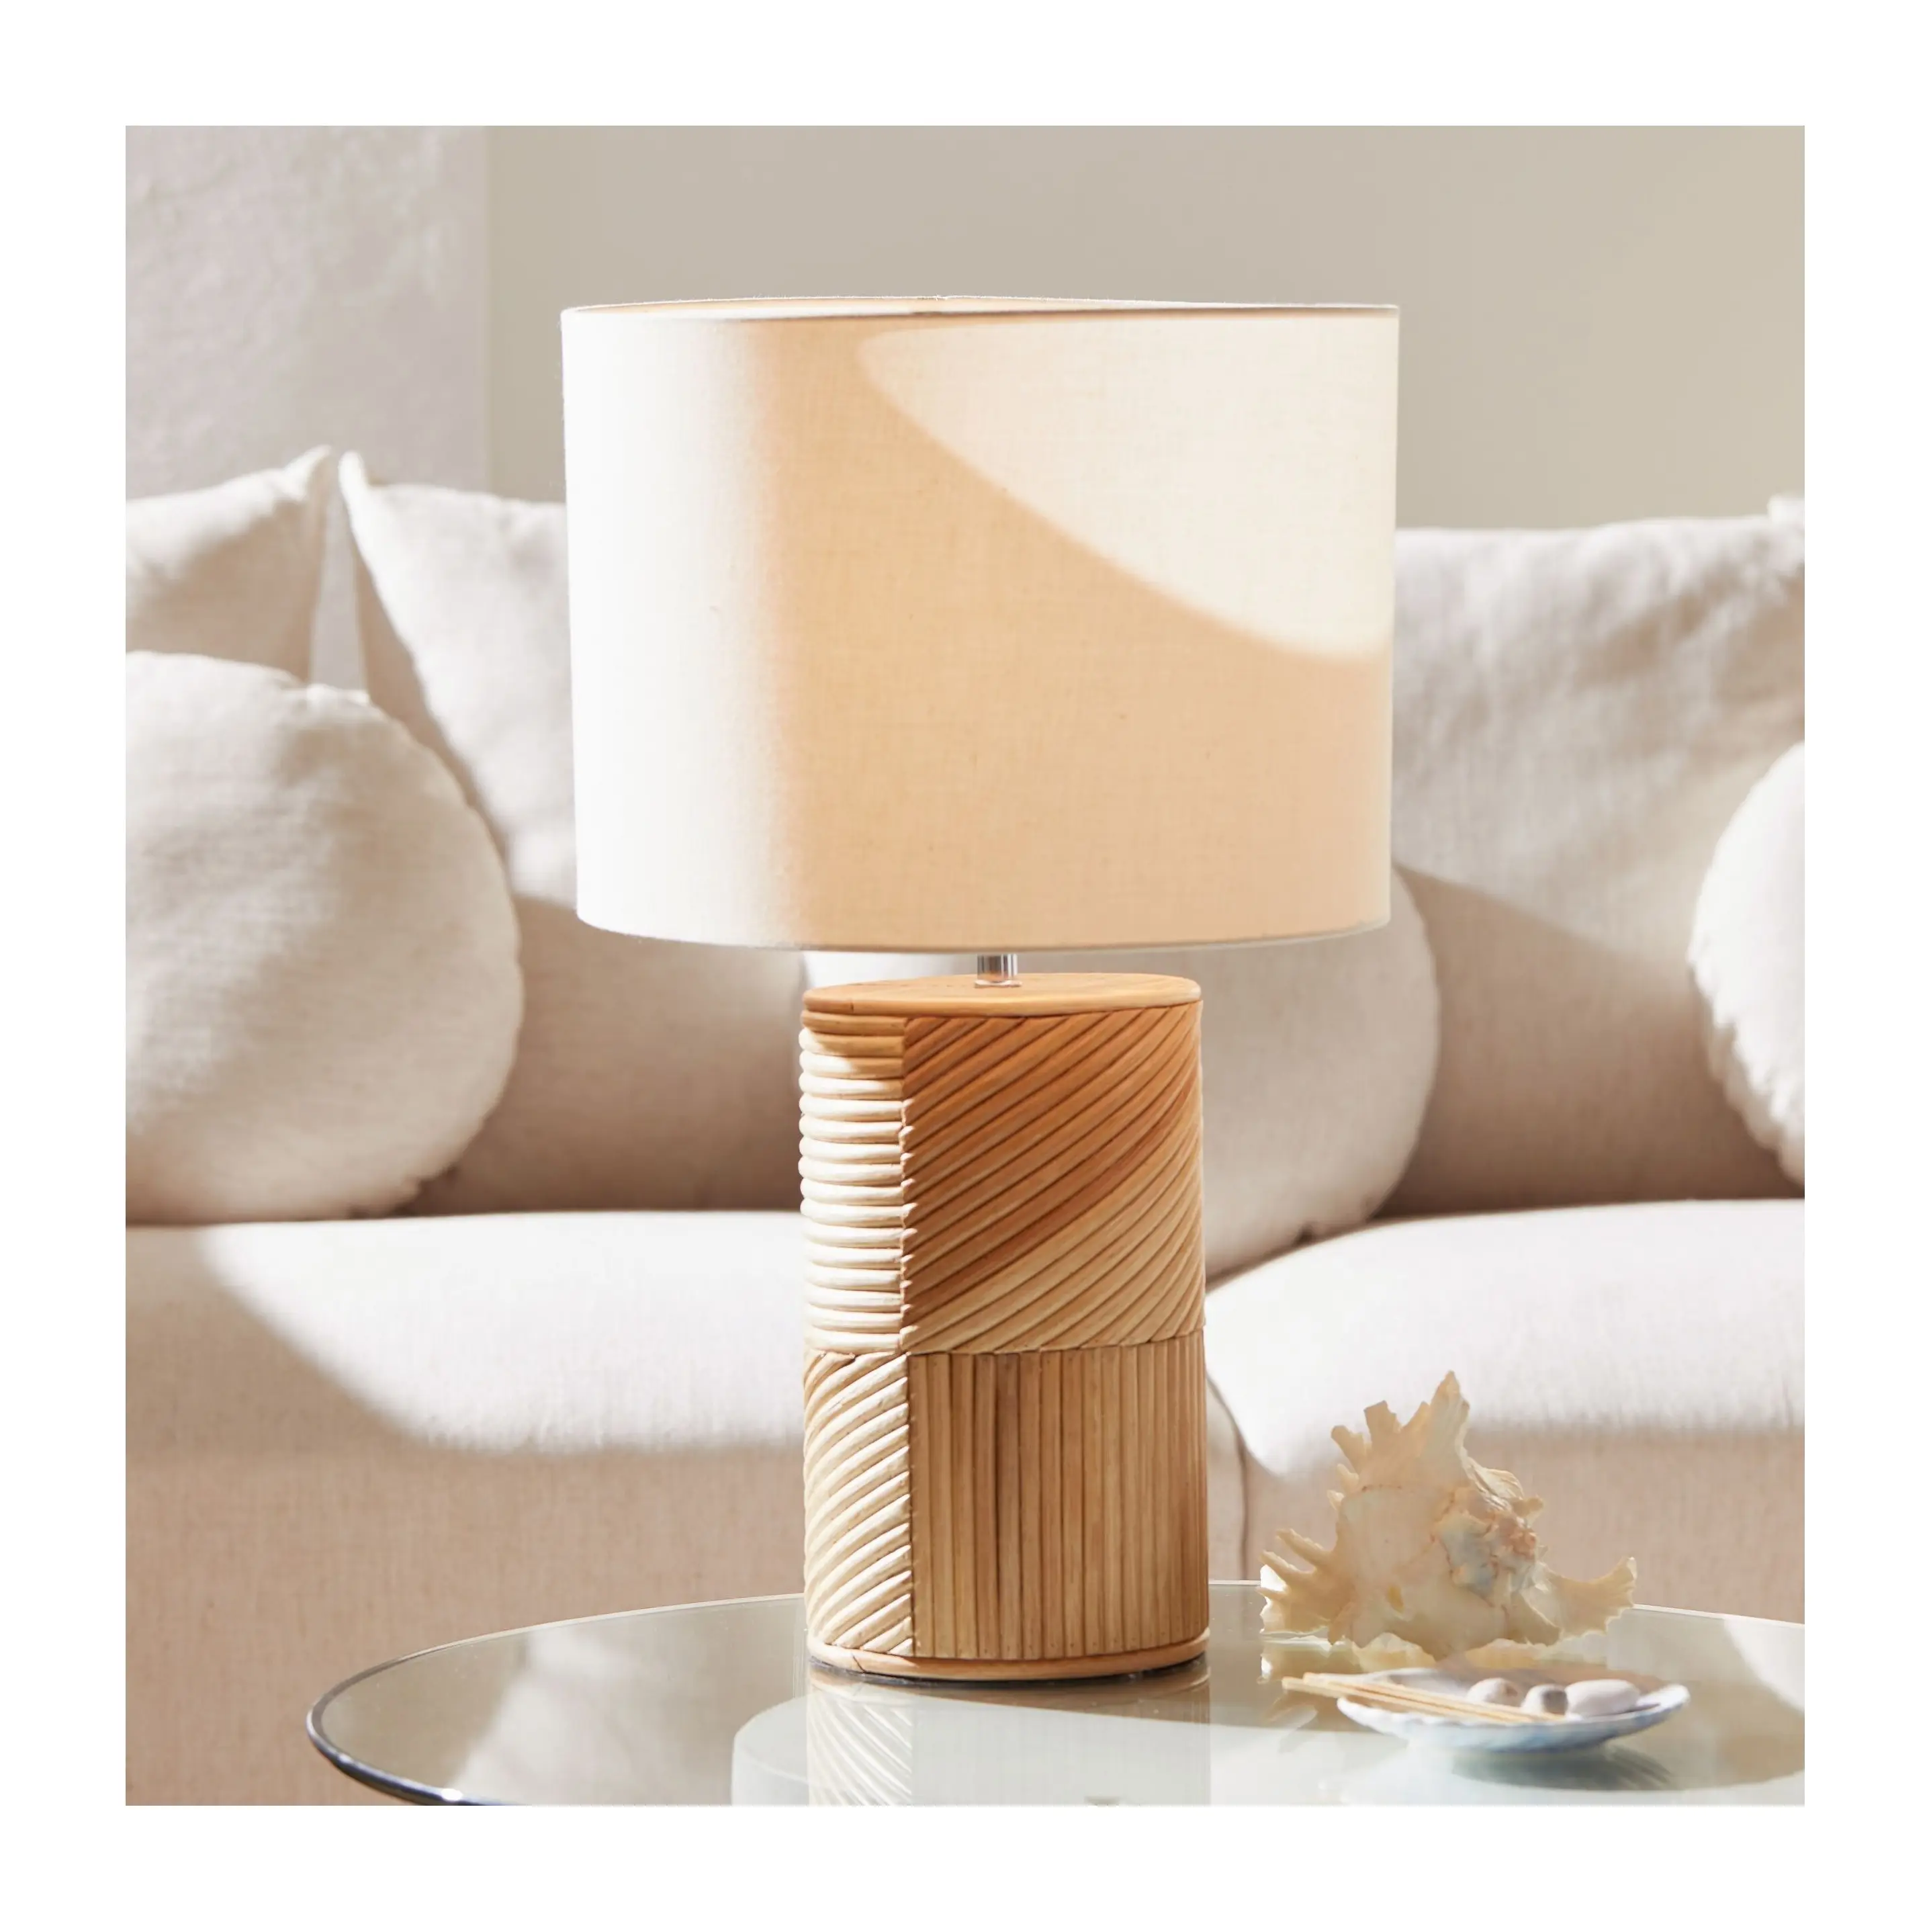 Eco friendly cordless rattan table lamp rustic style bed light luxurious natural lamps modern design